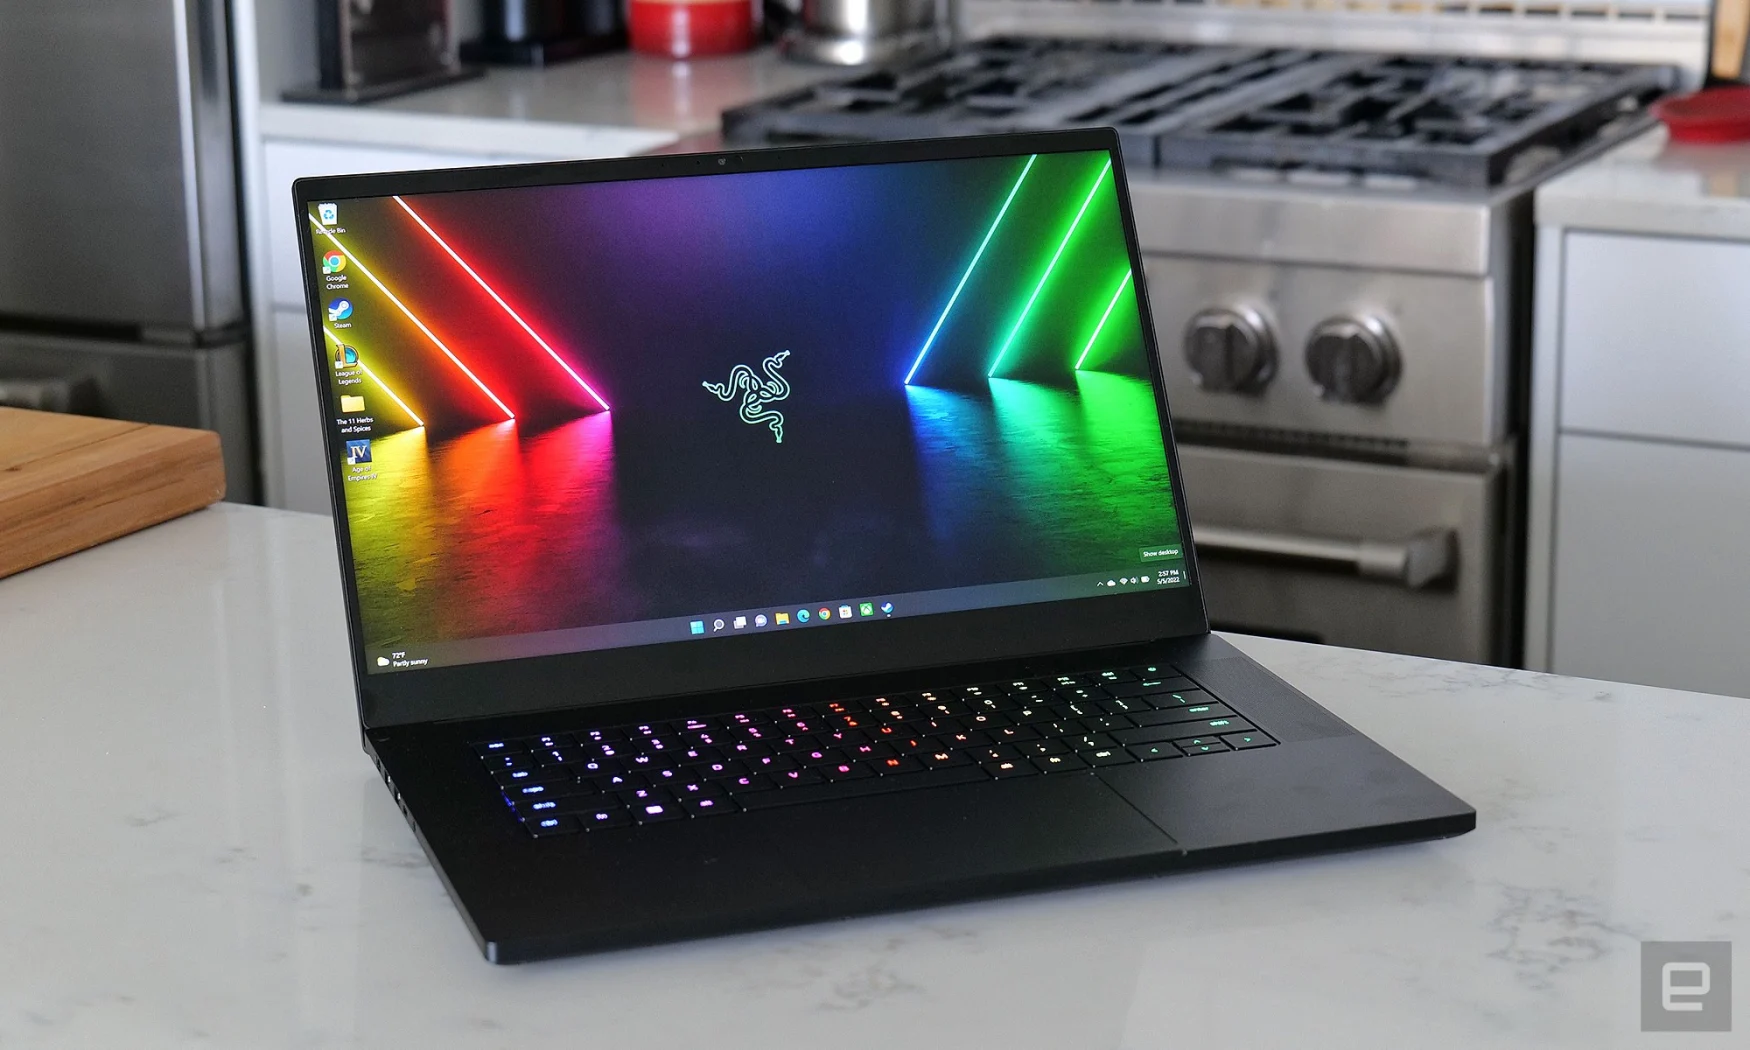 For its 2022 refresh, Razer has added updated components along with a few design tweaks like larger key caps to the Blade 15. 